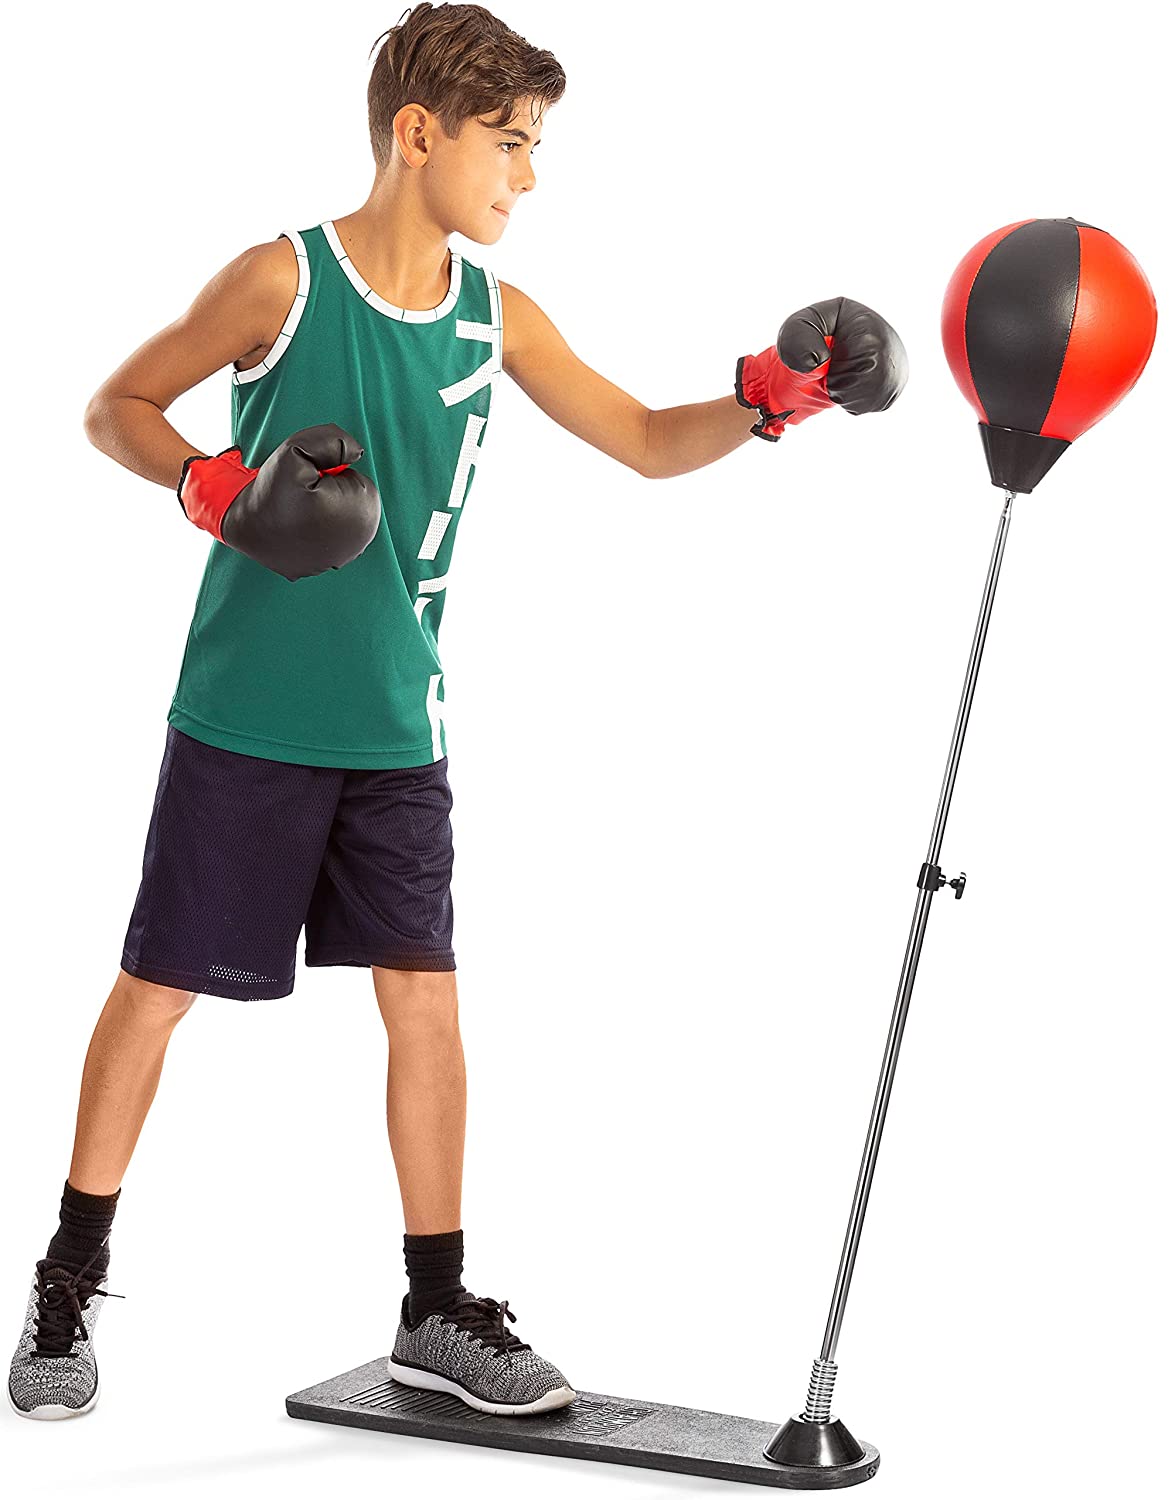 Top 9 Best Inflatable Punching Bags for Kids 2022 - Review & Buying Guide 6